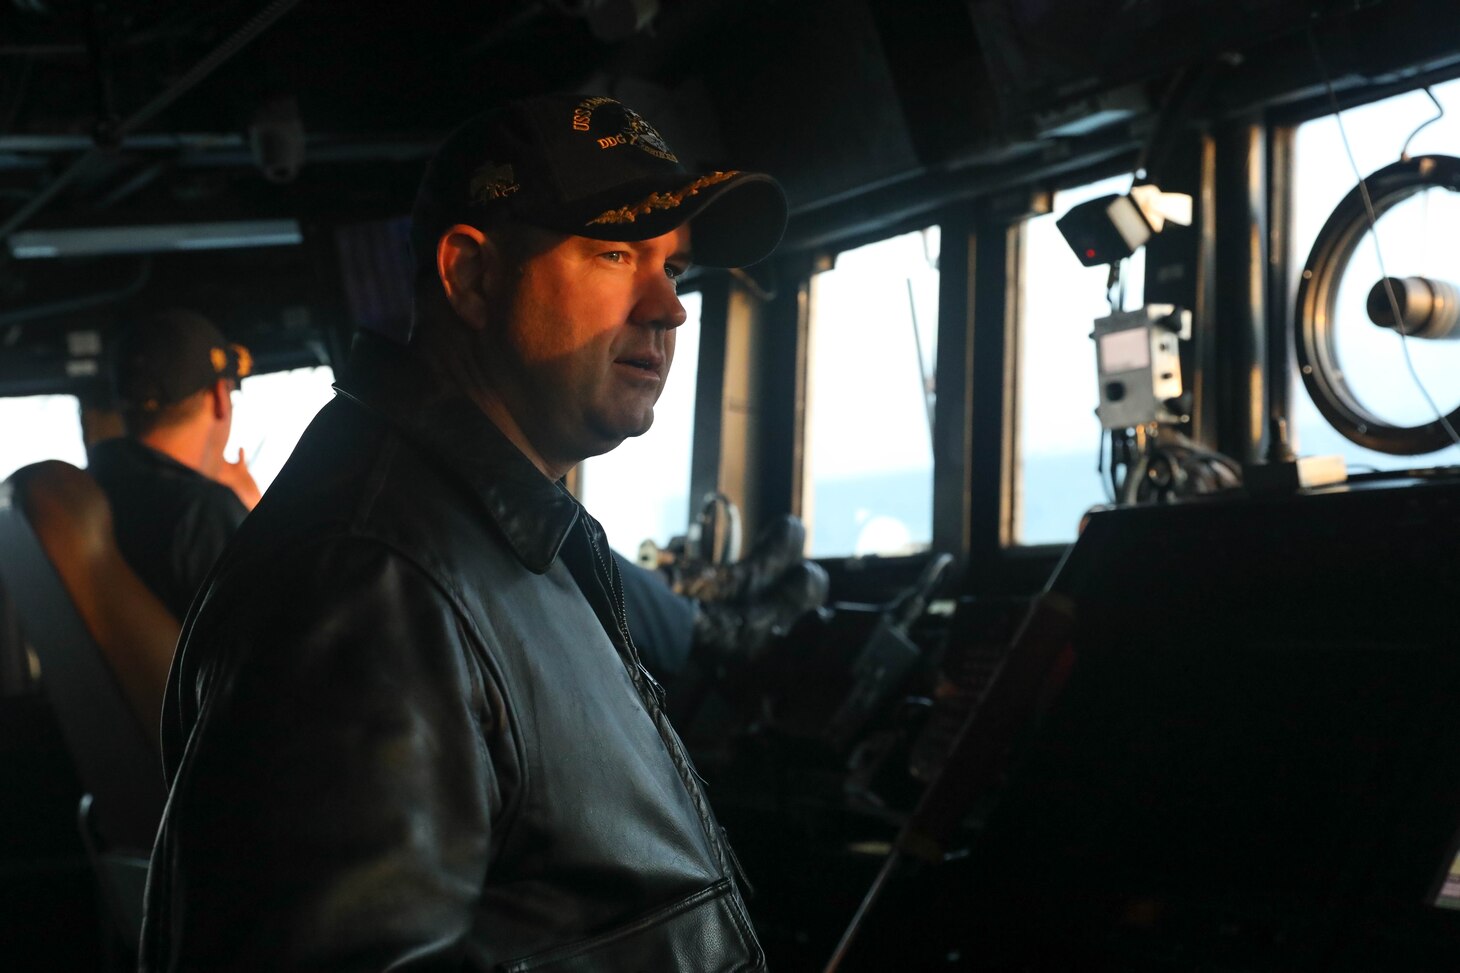 231102-N-CV021-1079 TAIWAN STRAIT (Nov. 2, 2023) Commanding Officer Cmdr. Charles Cooper stands watch on the bridge aboard the Arleigh Burke-class guided-missile destroyer USS Rafael Peralta (DDG 115) in the Taiwan Strait, Nov. 2. Rafael Peralta is forward-deployed and assigned to Commander, Task Force 71/Destroyer Squadron (DESRON) 15, the Navy’s largest DESRON and the U.S. 7th Fleet’s principal surface force. (U.S. Navy photo by Mass Communication Specialist 3rd Class Alexandria Esteban)